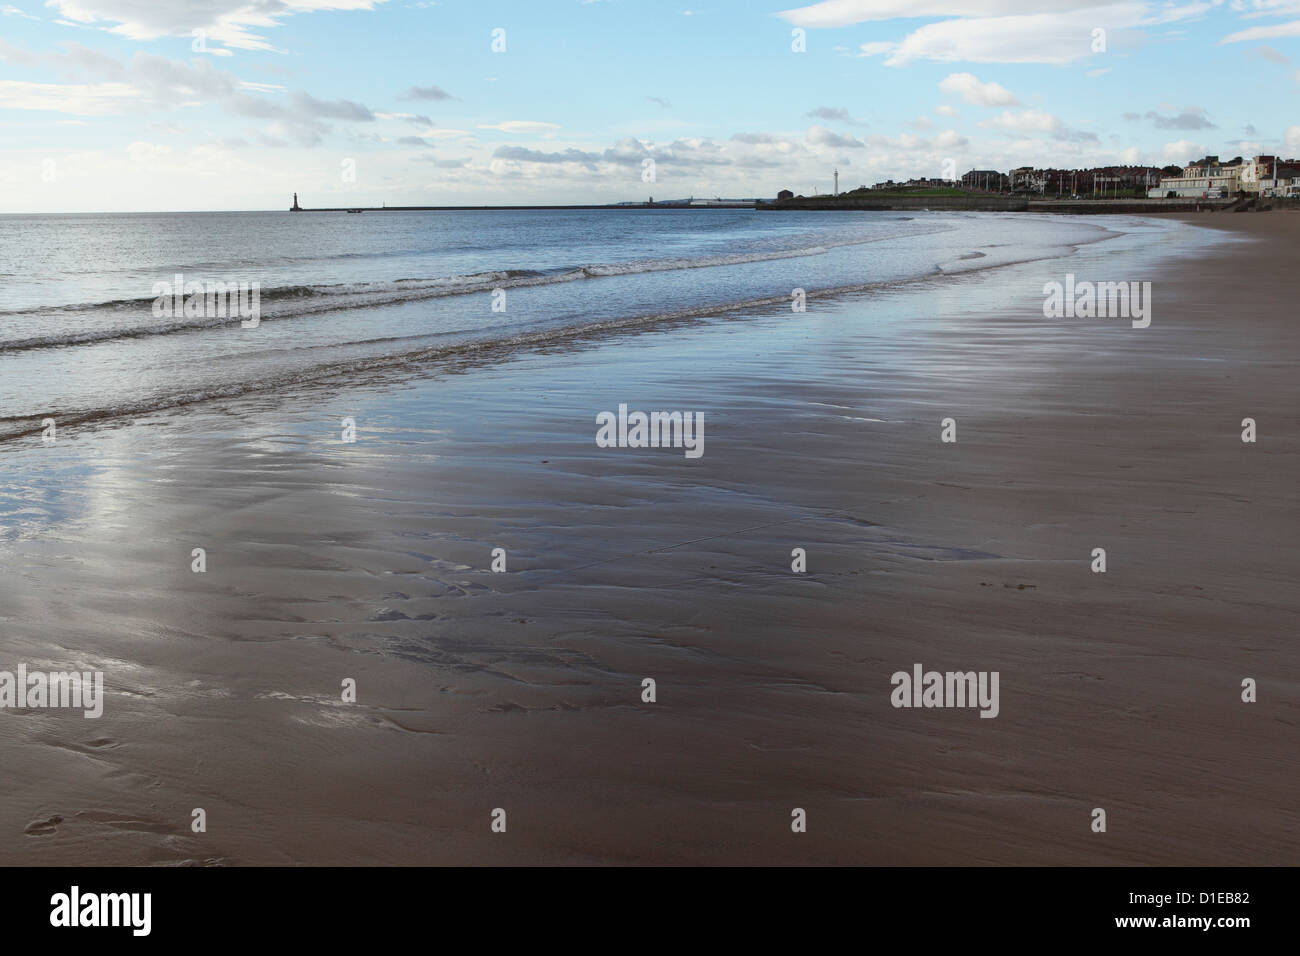 Low tide at Seaburn Beach, Roker Pier is seen in the distance, Sunderland, Tyne and Wear, England, United Kingdom, Europe Stock Photo